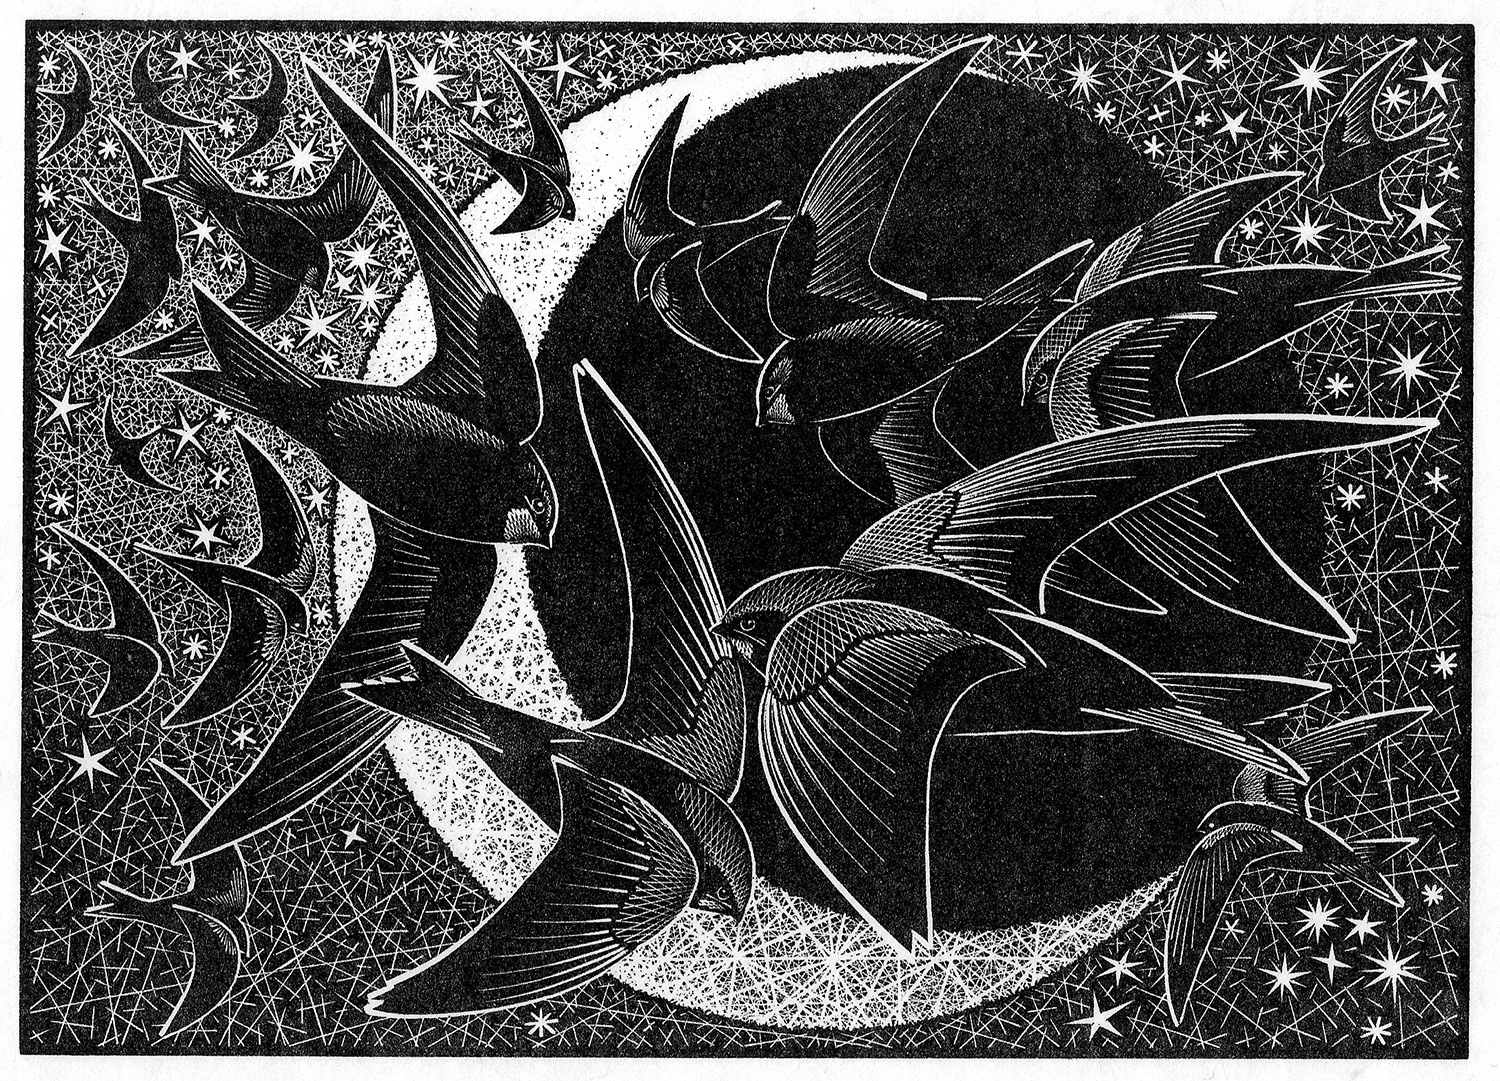 Nocturnal Encounters-Swifts, Stars and Sickle Moon by Colin See-Paynton